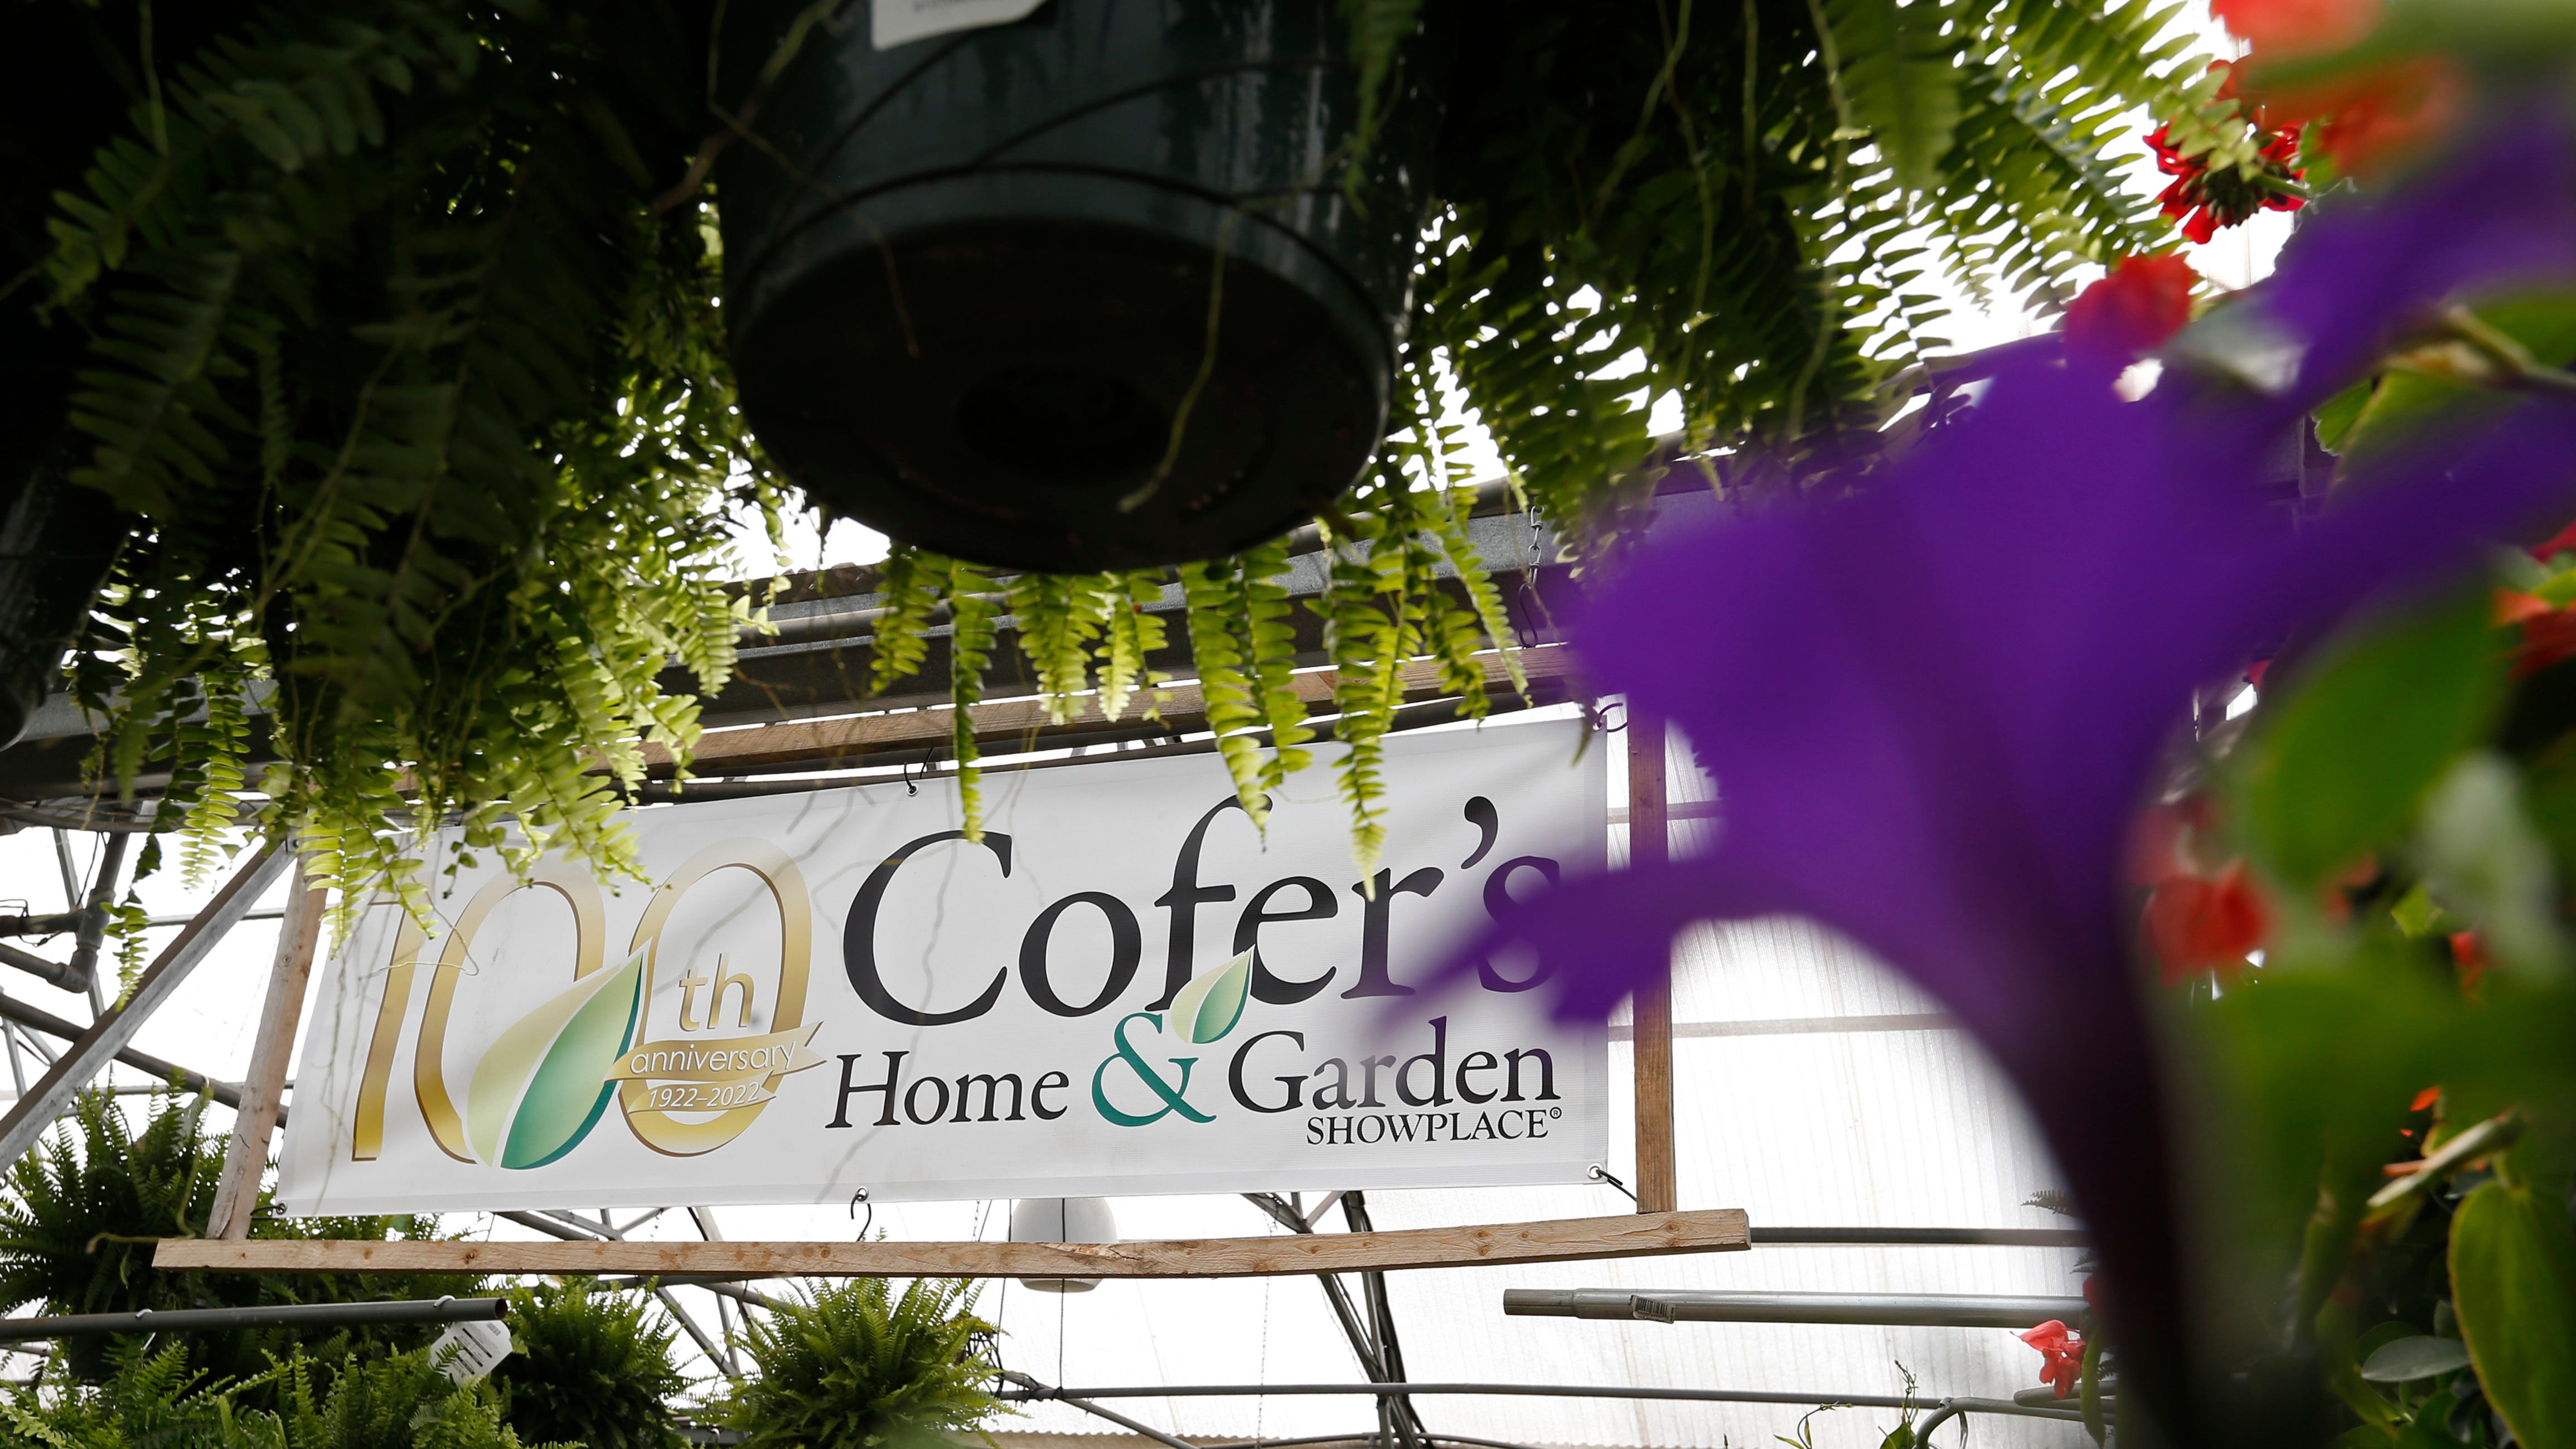 A commemorative 100th-anniversary sign hangs at Cofer's Home & Garden nursery in Athens, Ga., on Thursday, March 17, 2022. The home & garden store celebrates its 100th anniversary this year.